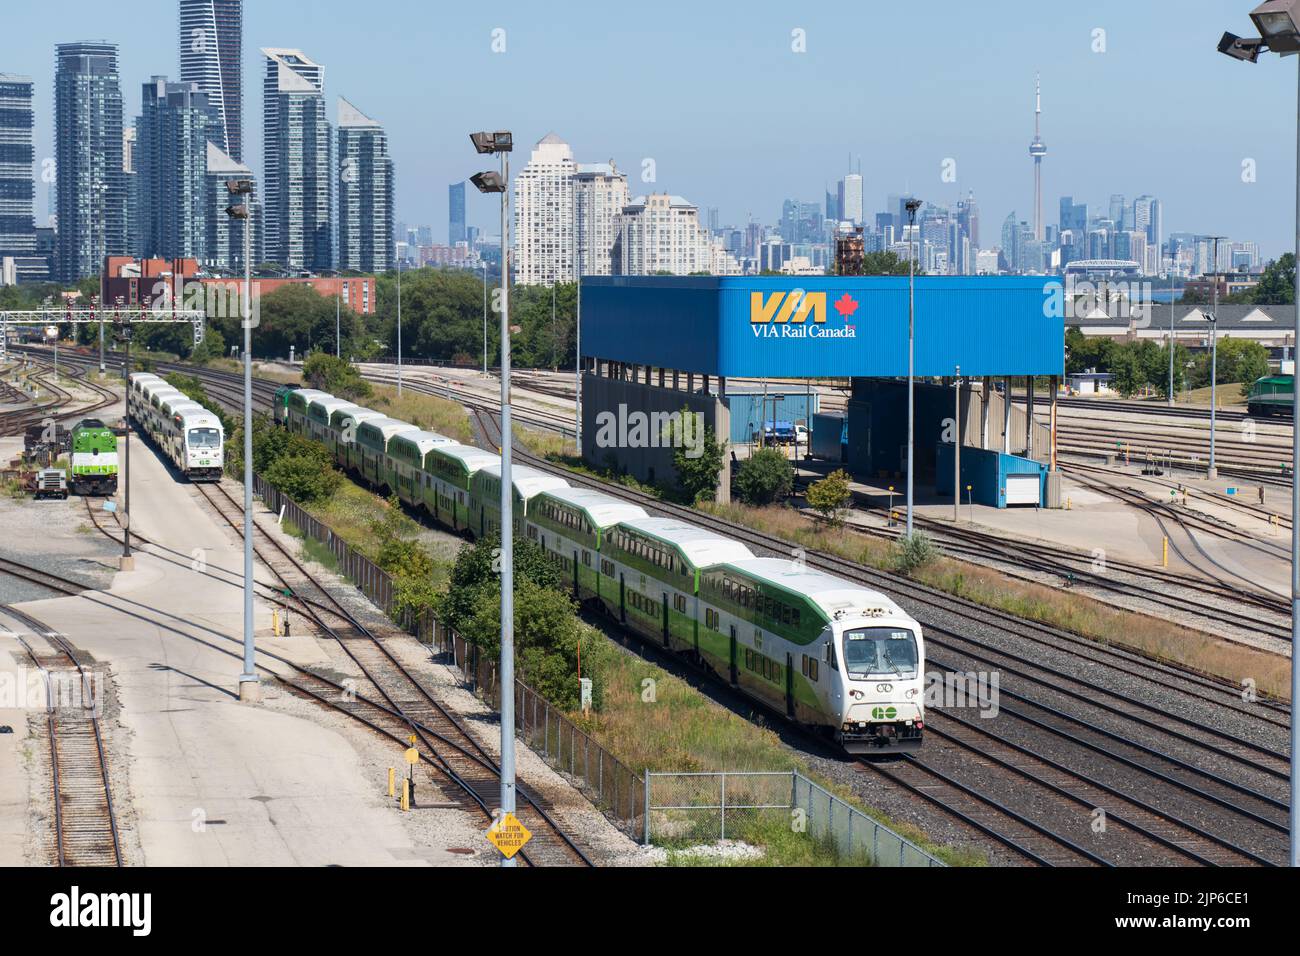 A GO Transit train passes through a train station on the outskirts of Toronto, the city skyline is seen in the far background. Stock Photo